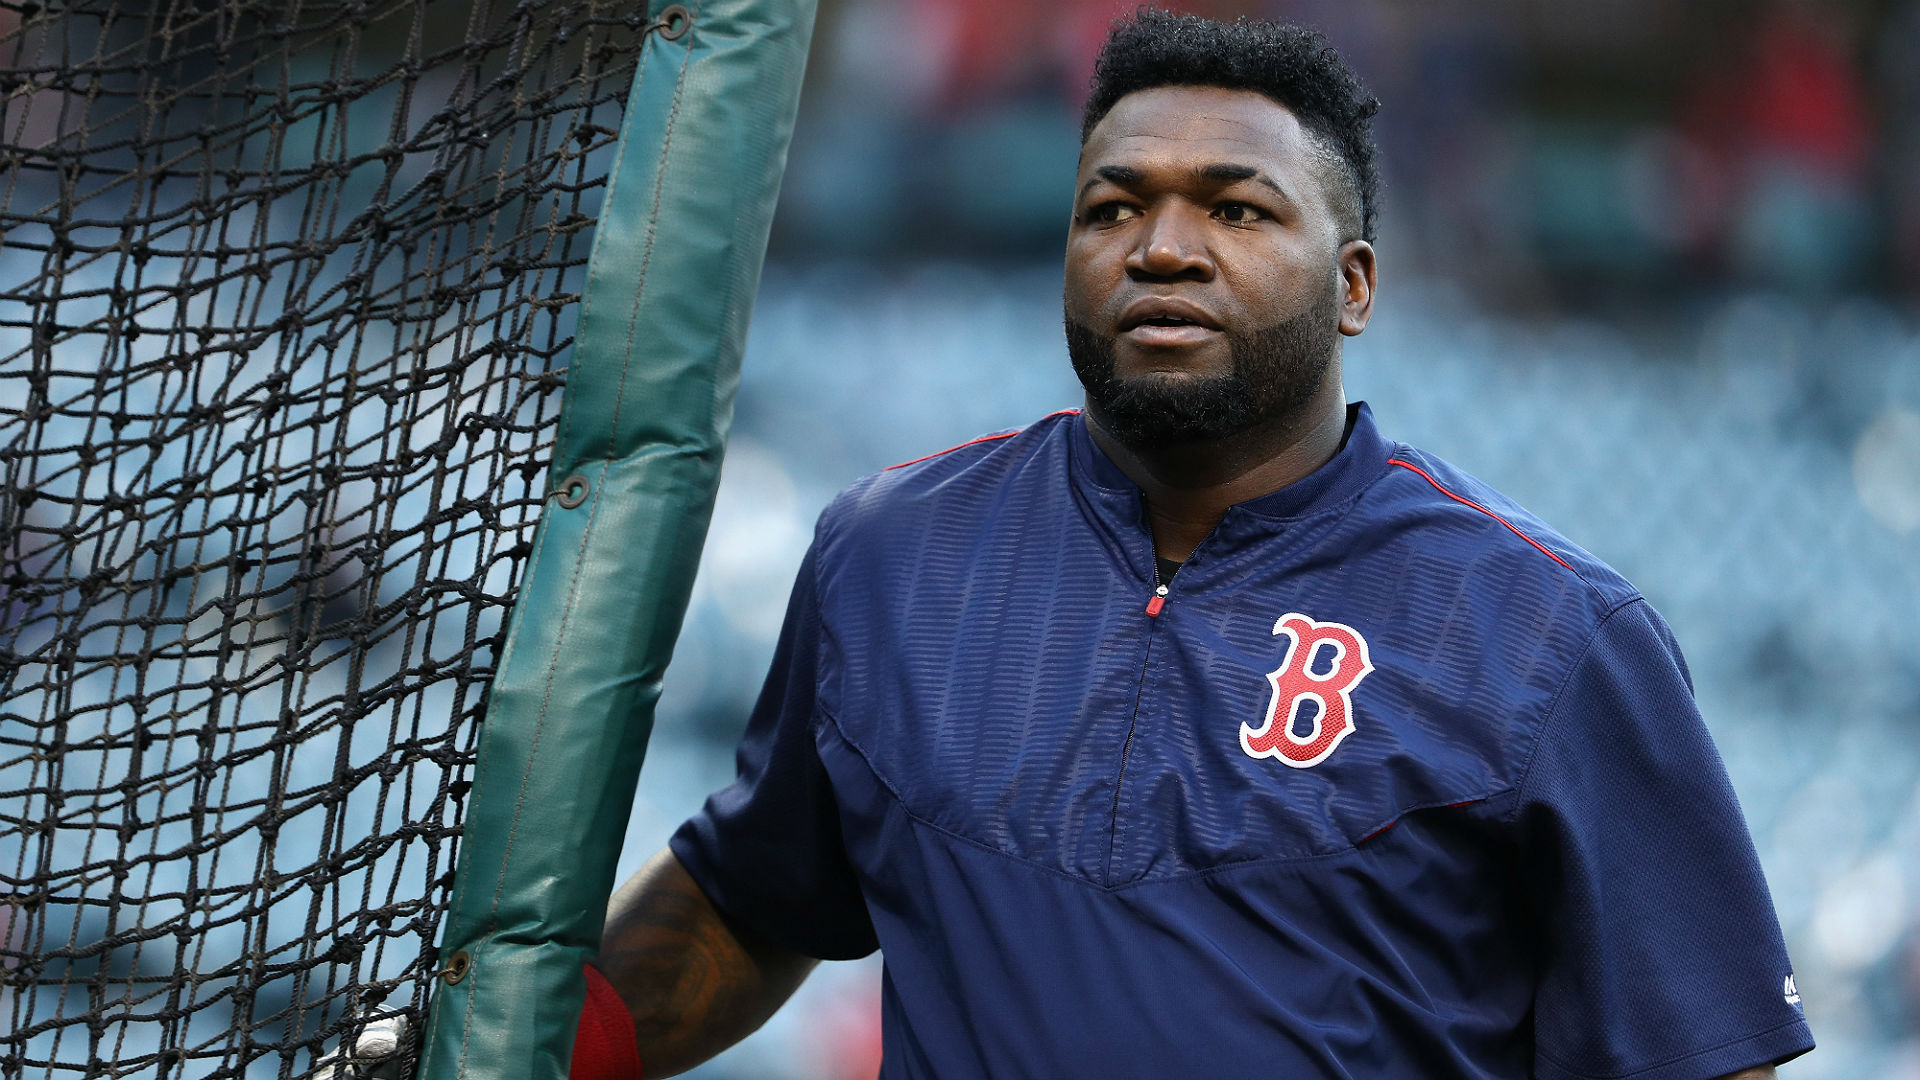 The retired Red Sox star, who had been listed in "guarded" condition in recent days, is still in intensive care.